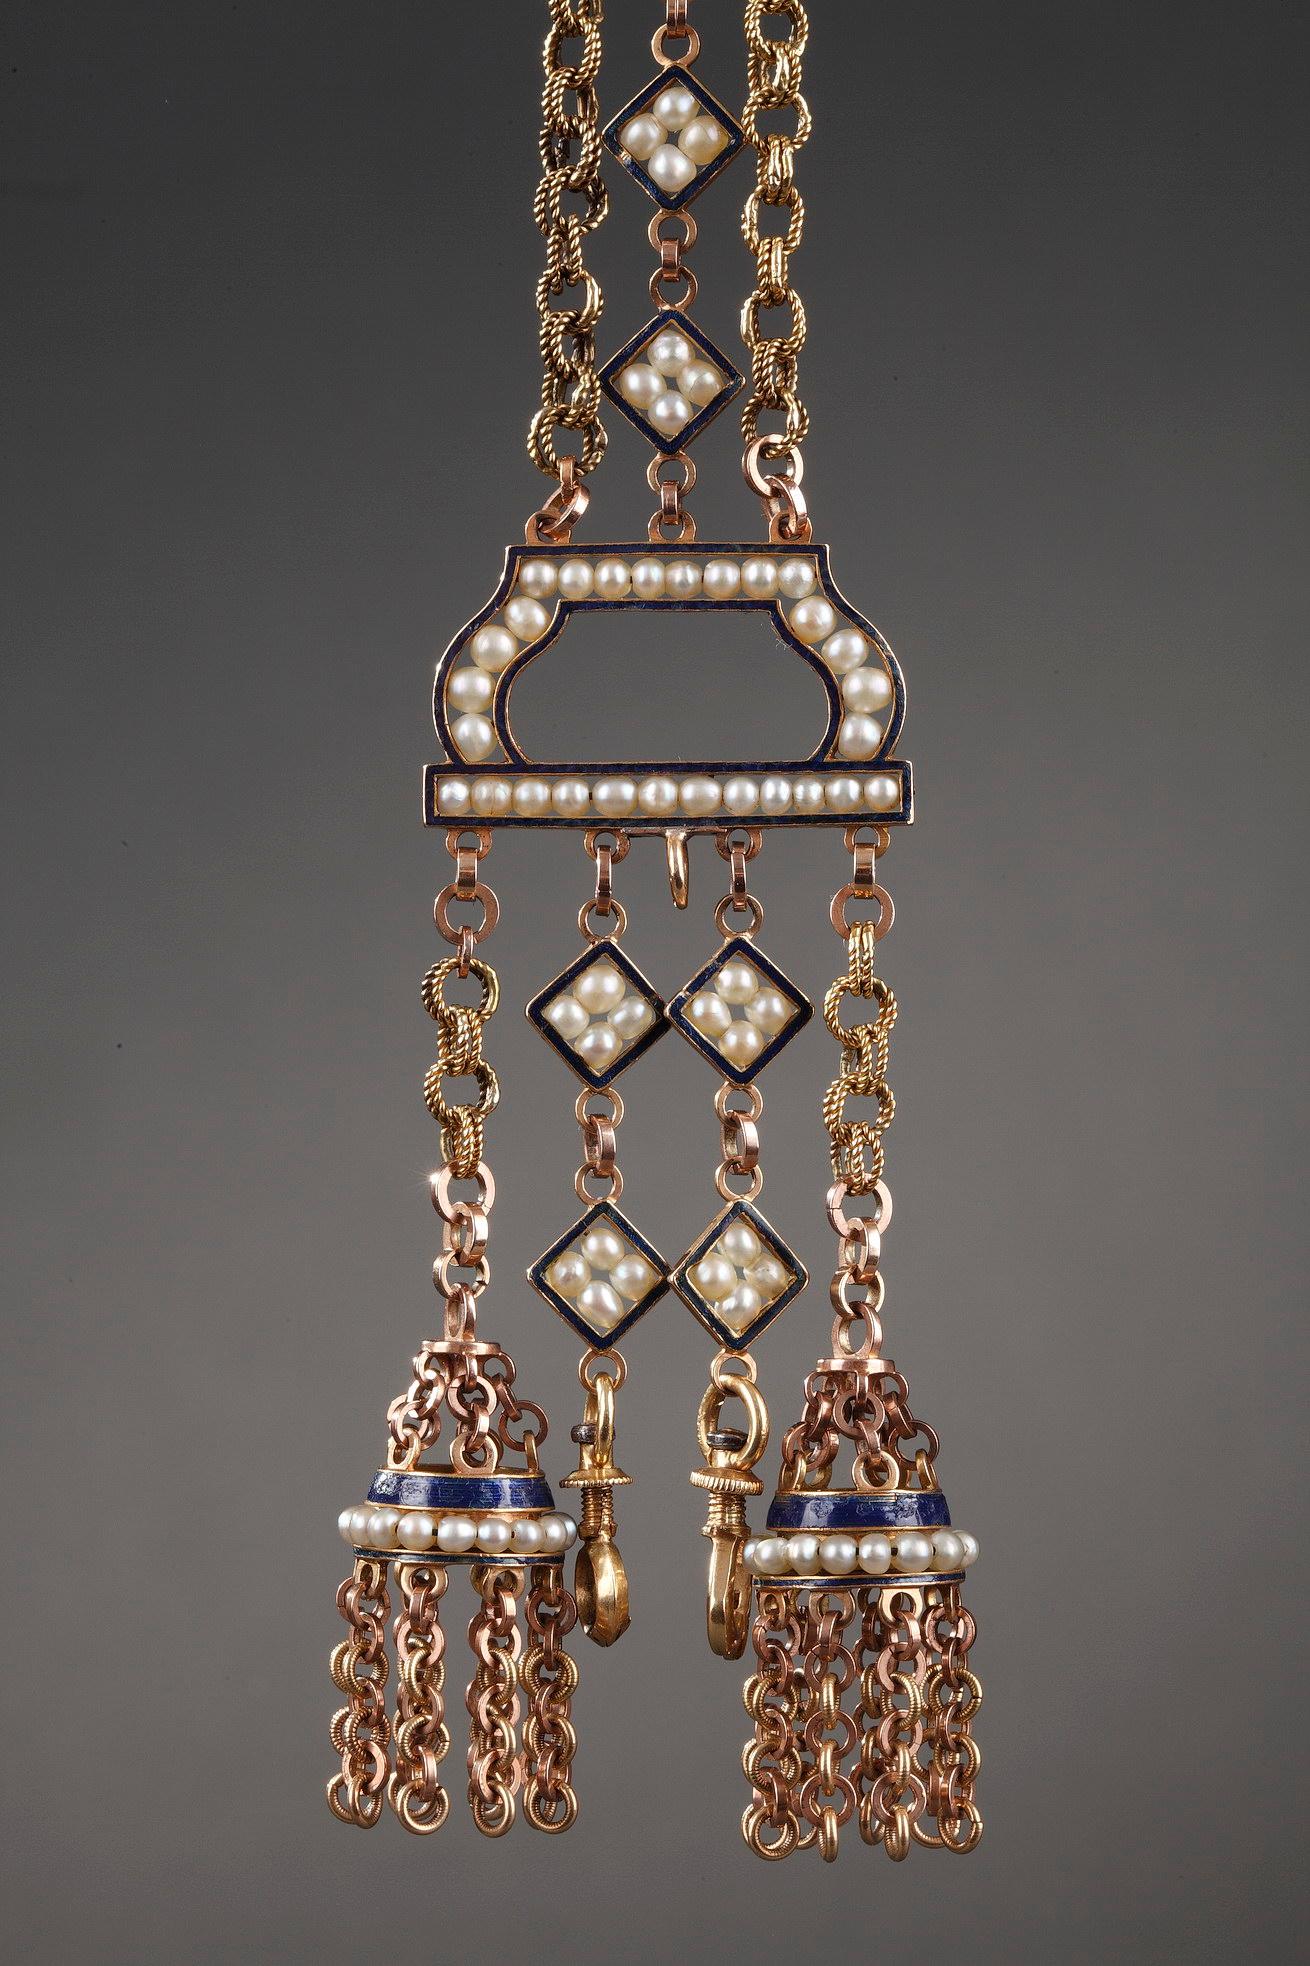 Chatelaine composed of gold overlaid with royal blue enamel. Two gold link chains flank a central chain whose diamond-shaped links are each decorated with four pearls. These three chains are attached to an enameled half circle that is embellished